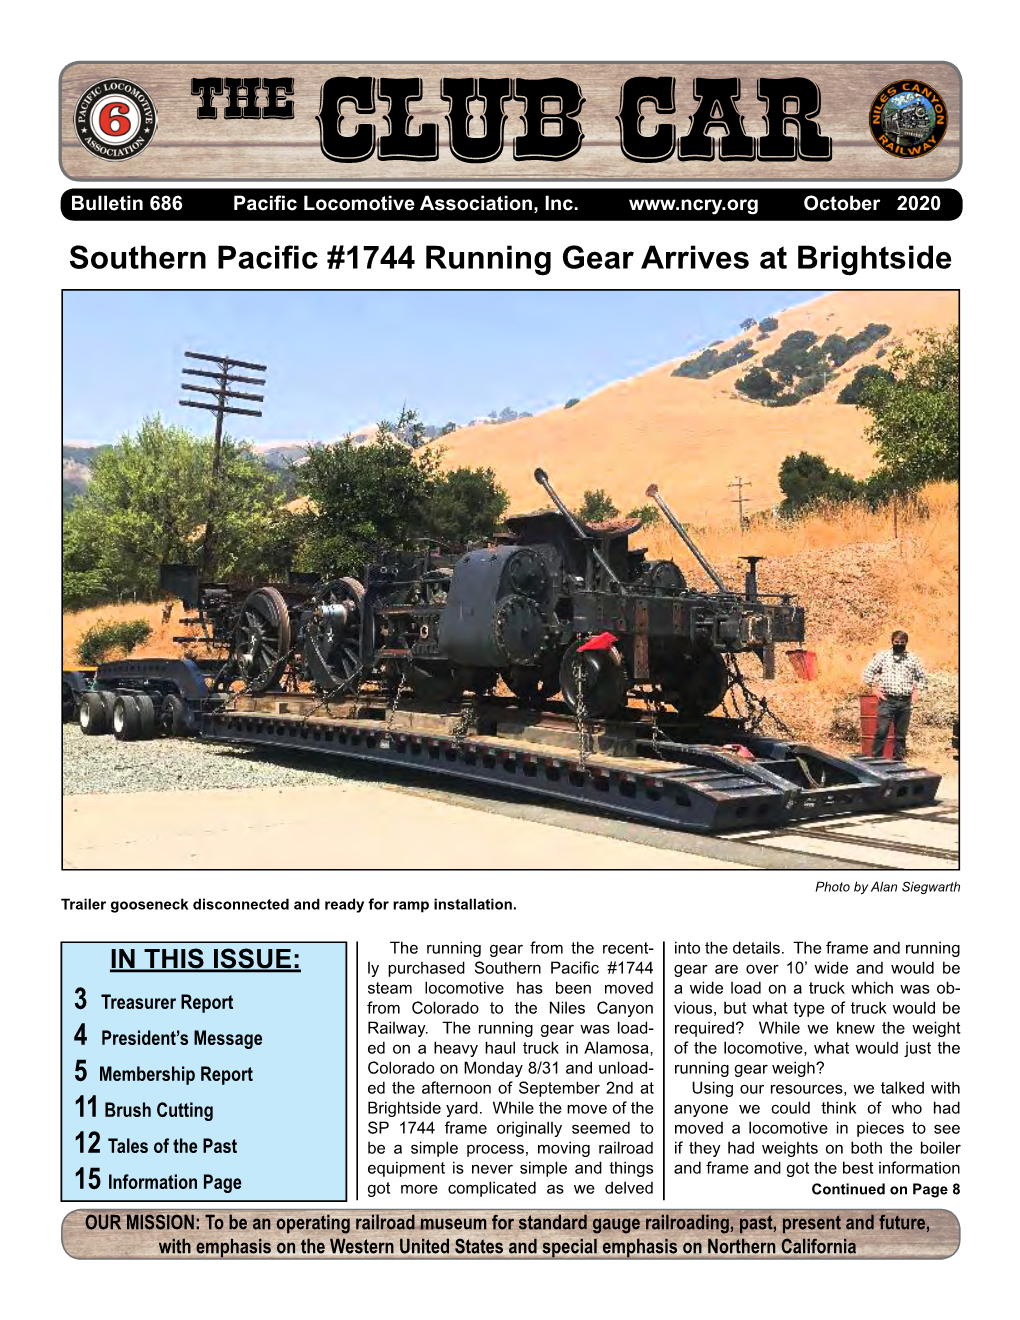 Southern Pacific #1744 Running Gear Arrives at Brightside